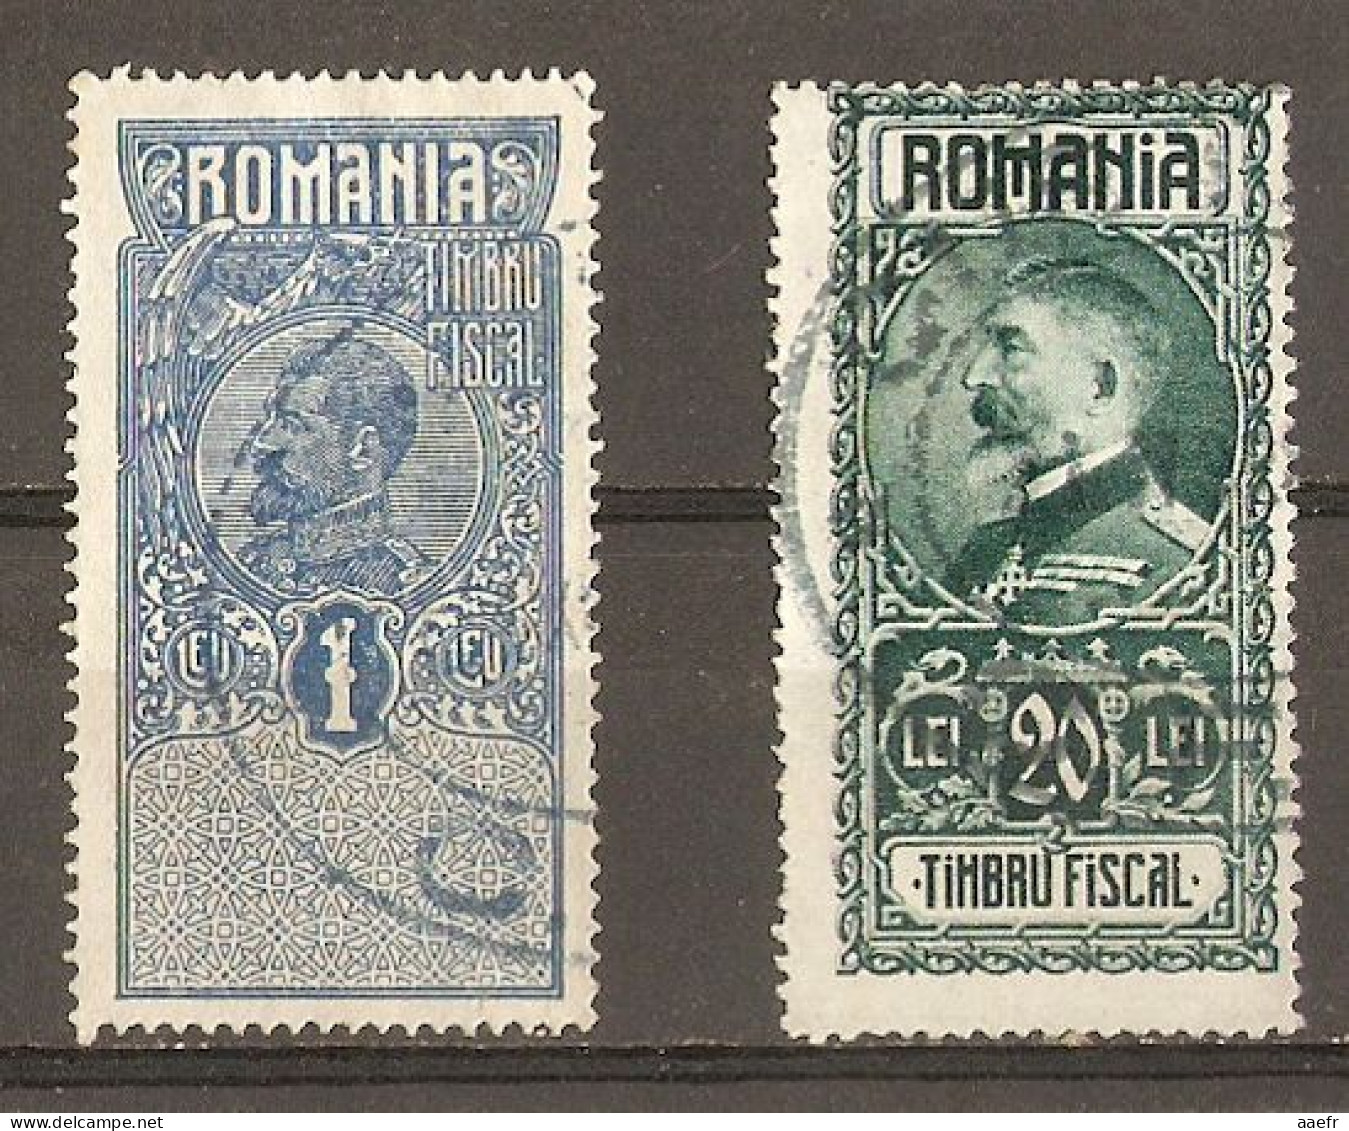 Roumanie - Petit Lot De 2 Timbres Fiscaux - Revenue Stamps - Charles 1er - Ferdinand 1er - Used Stamps